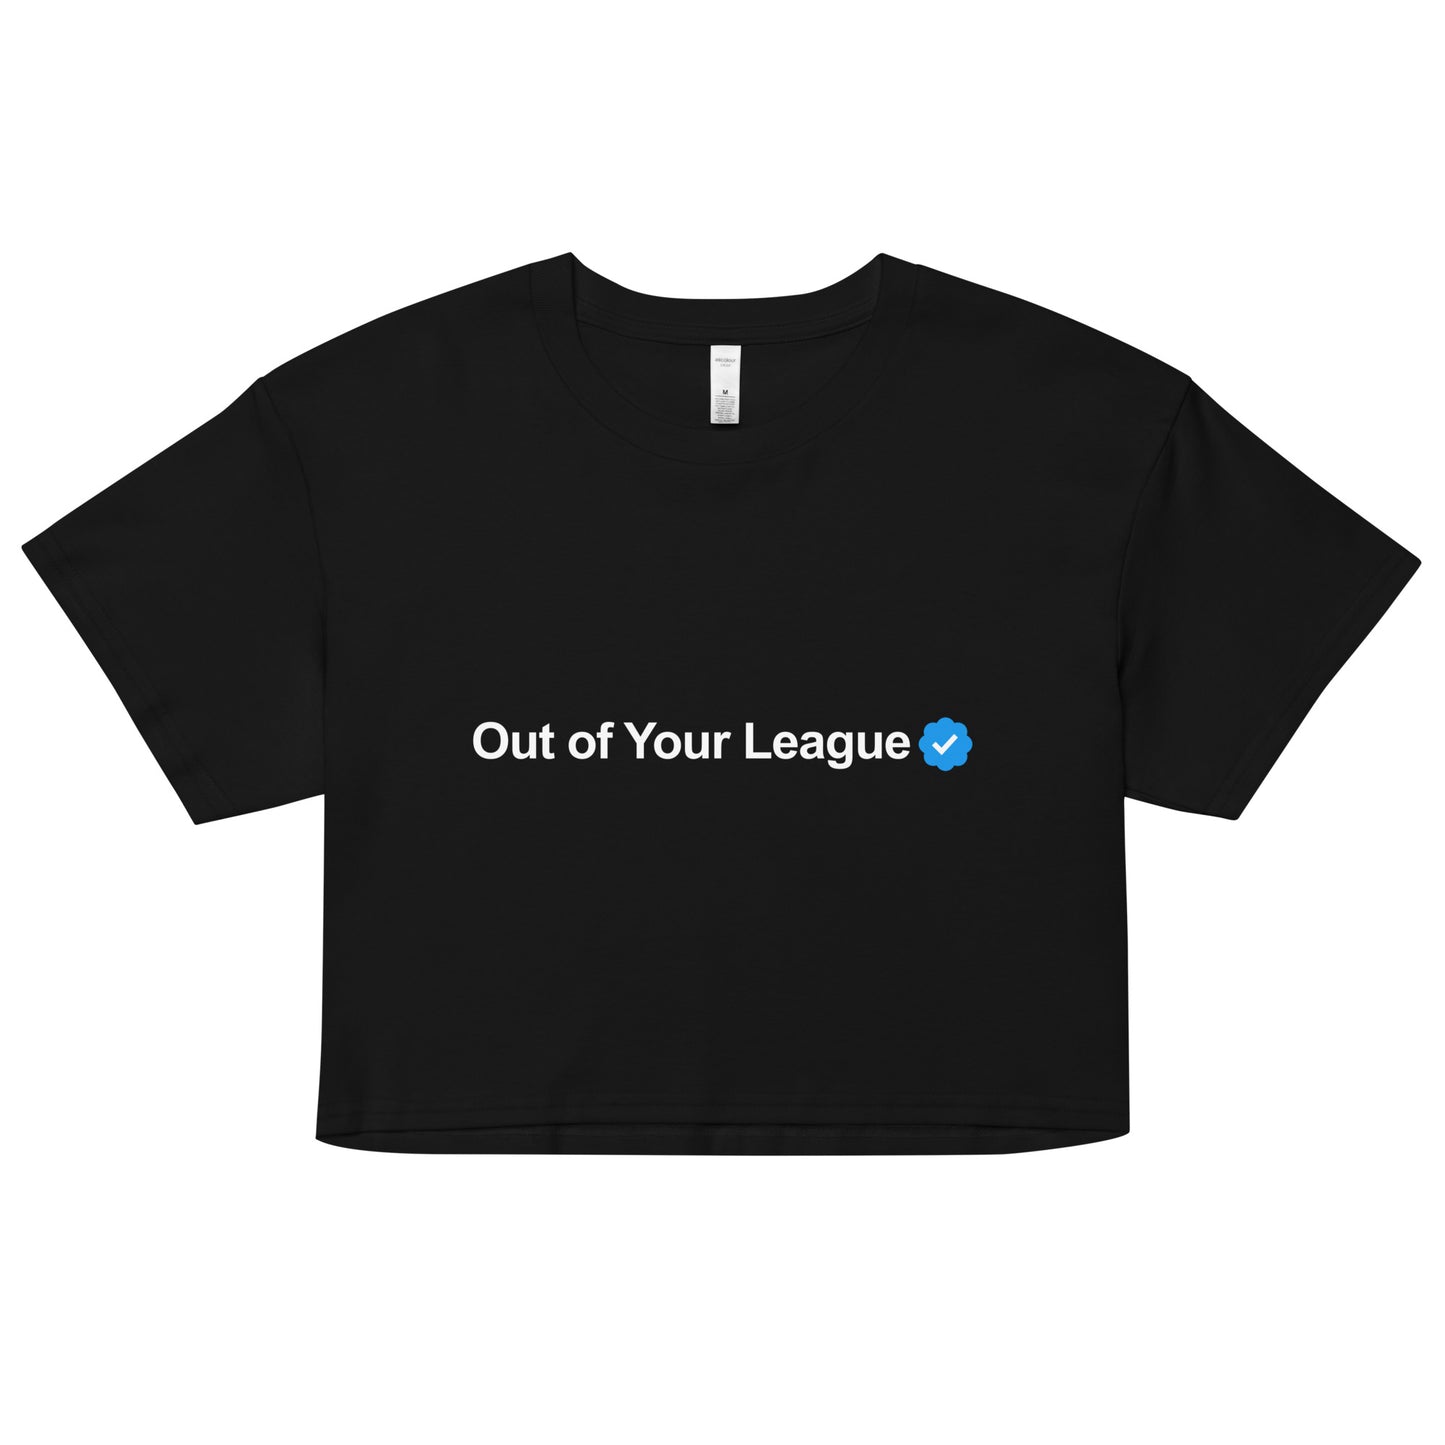 Out of Your League crop top